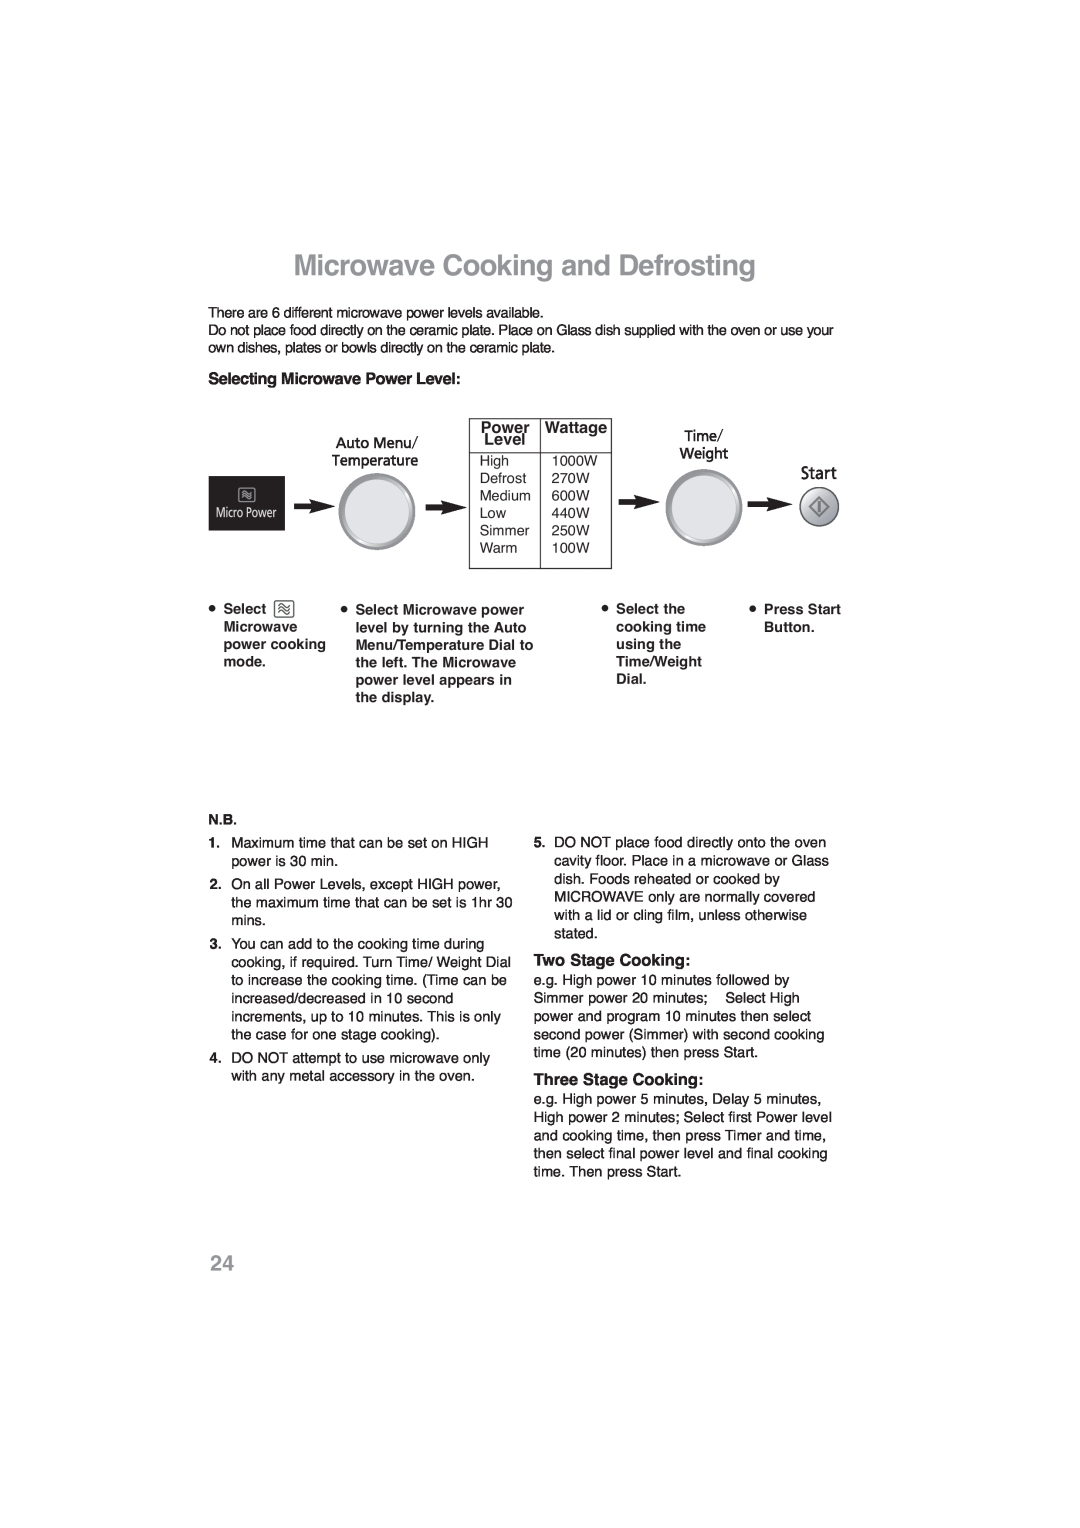 Panasonic NN-CF768M Microwave Cooking and Defrosting, Selecting Microwave Power Level, Wattage, Two Stage Cooking, Button 